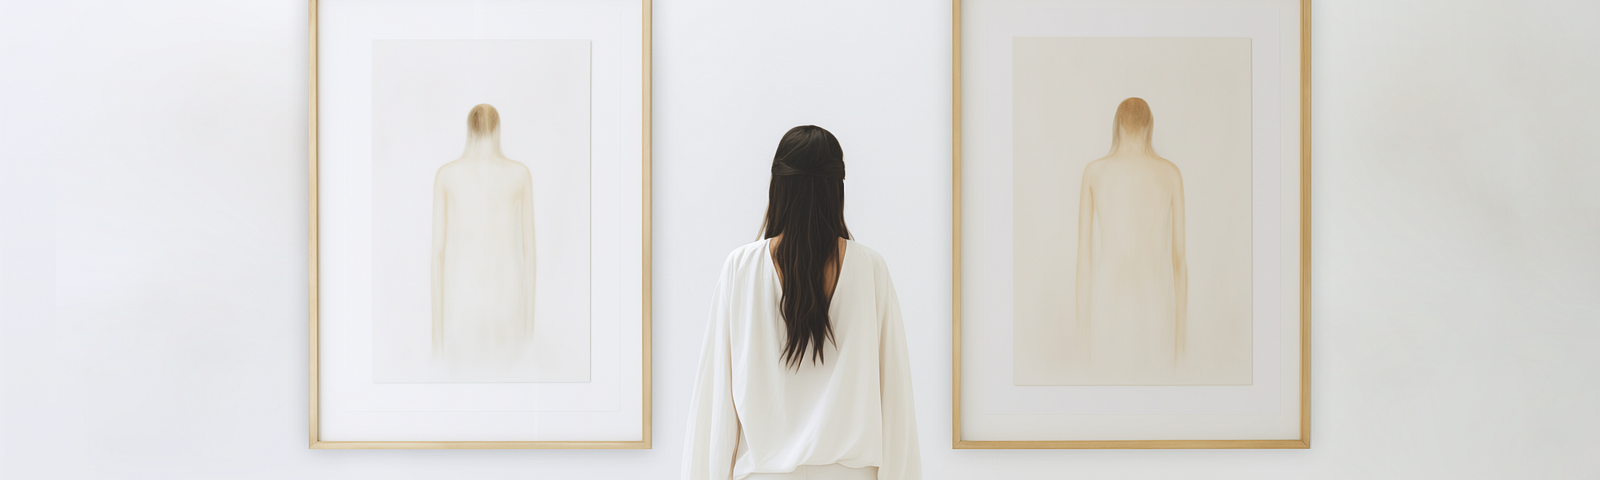 Aa girl in a white room looking at two paintings